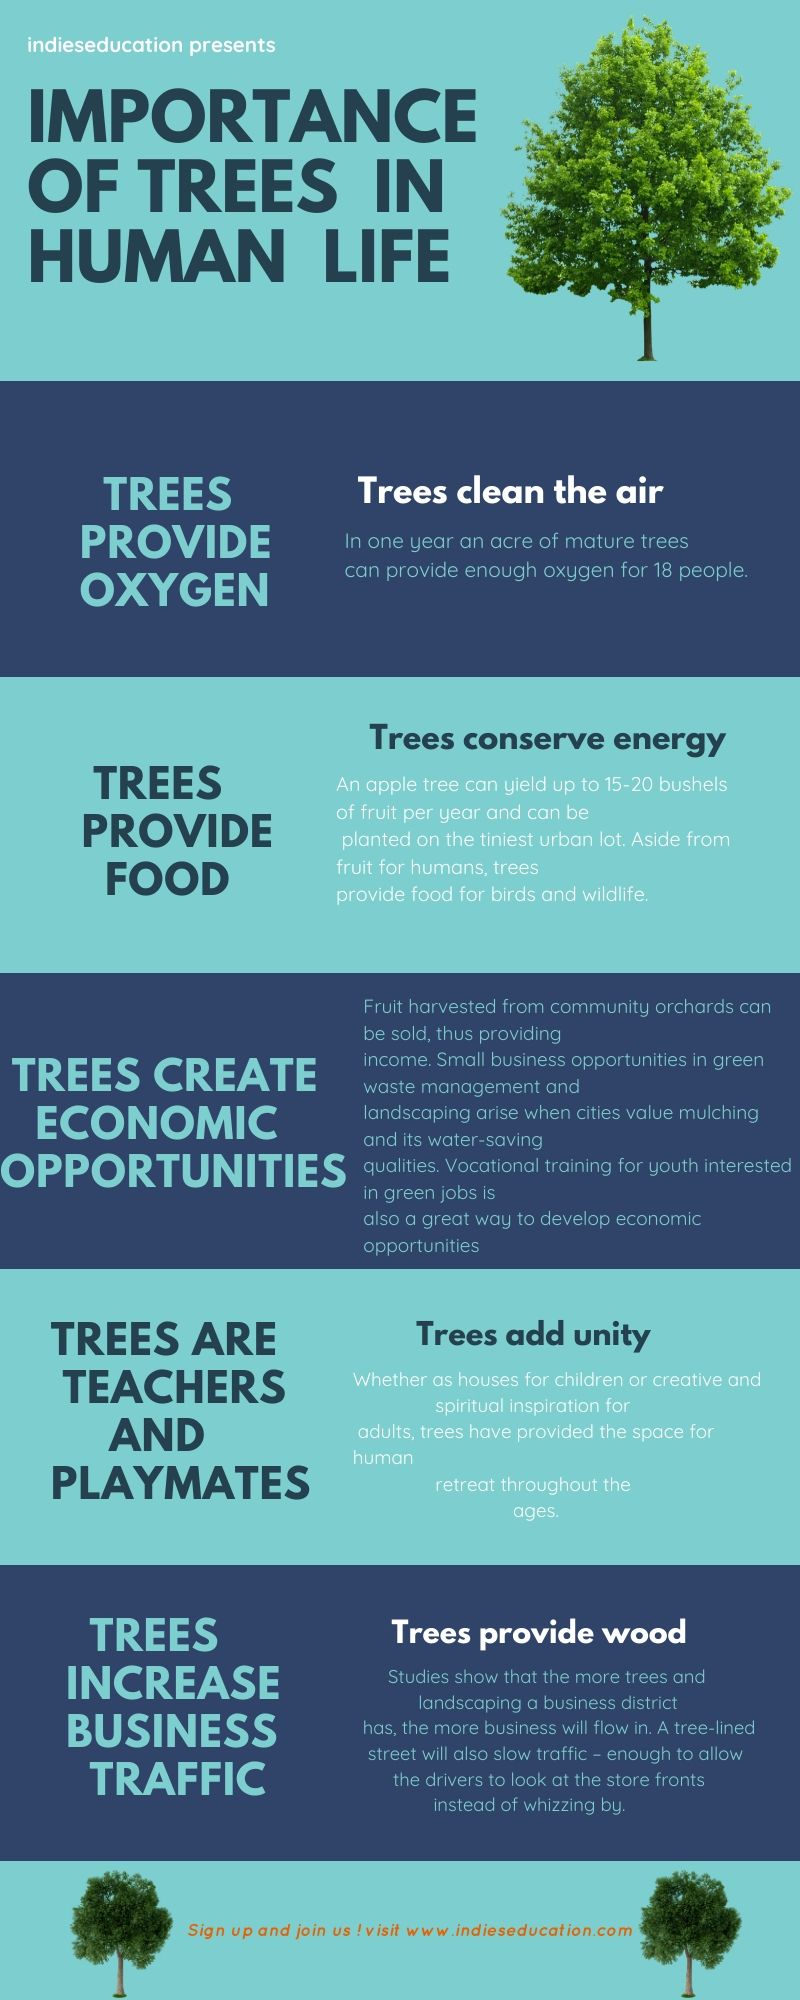 Importance of trees